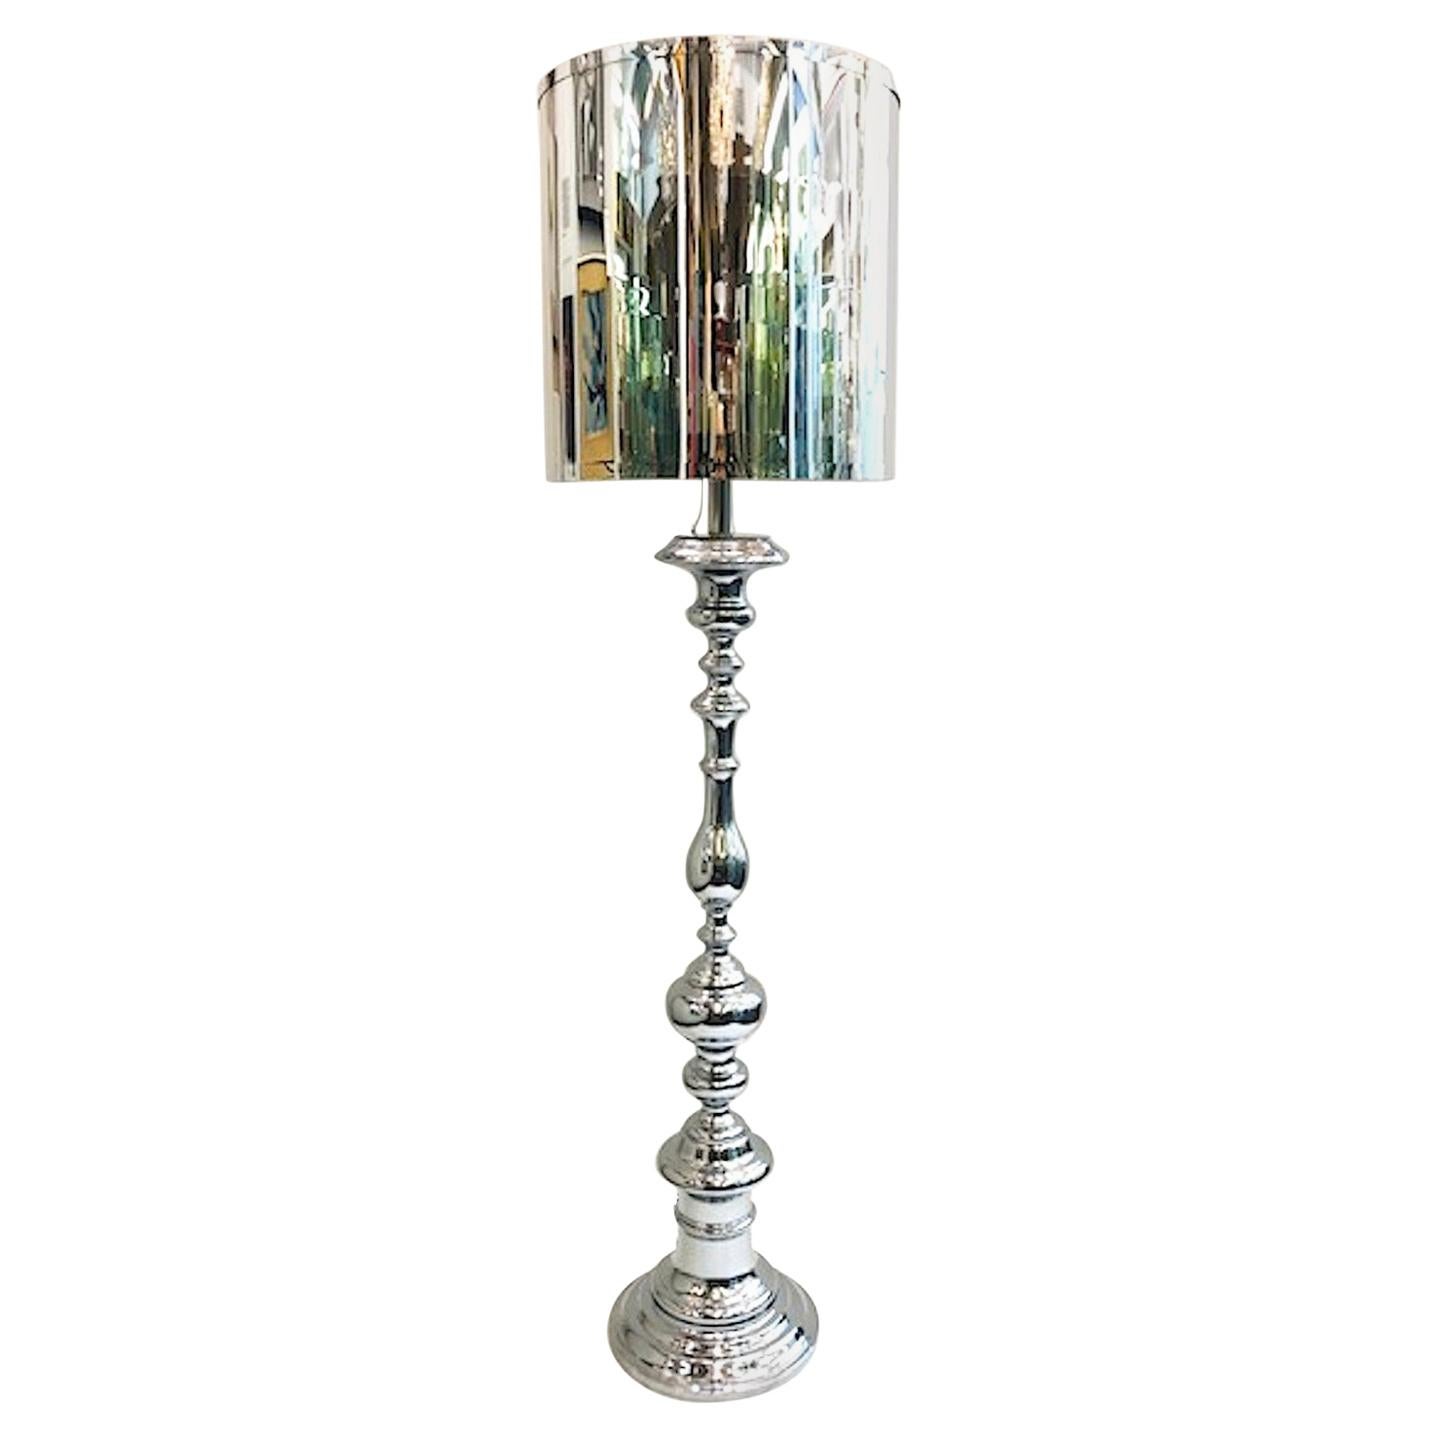 Italian 1970s Chrome "Turned Wood" Style Candlestick Floor Lamp For Sale